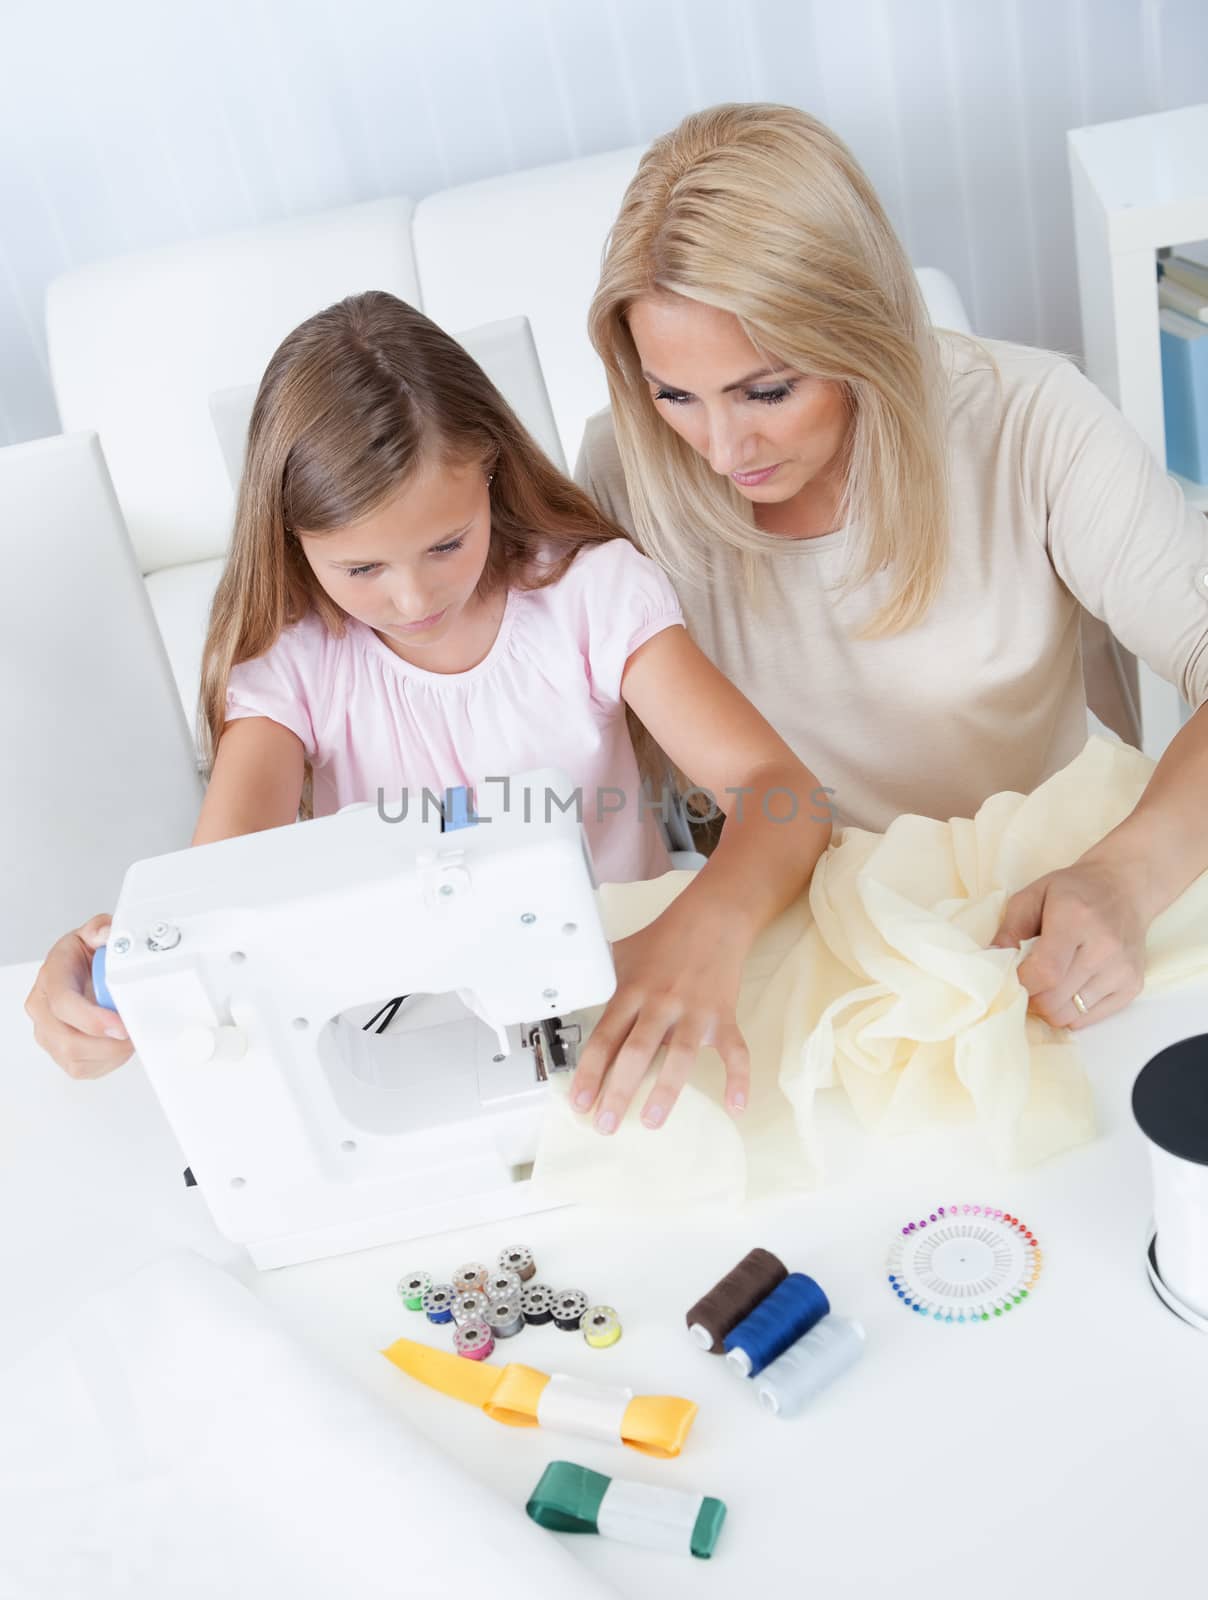 Portrait Of A Beautiful Young Girl Sewing With Her Mother At Home